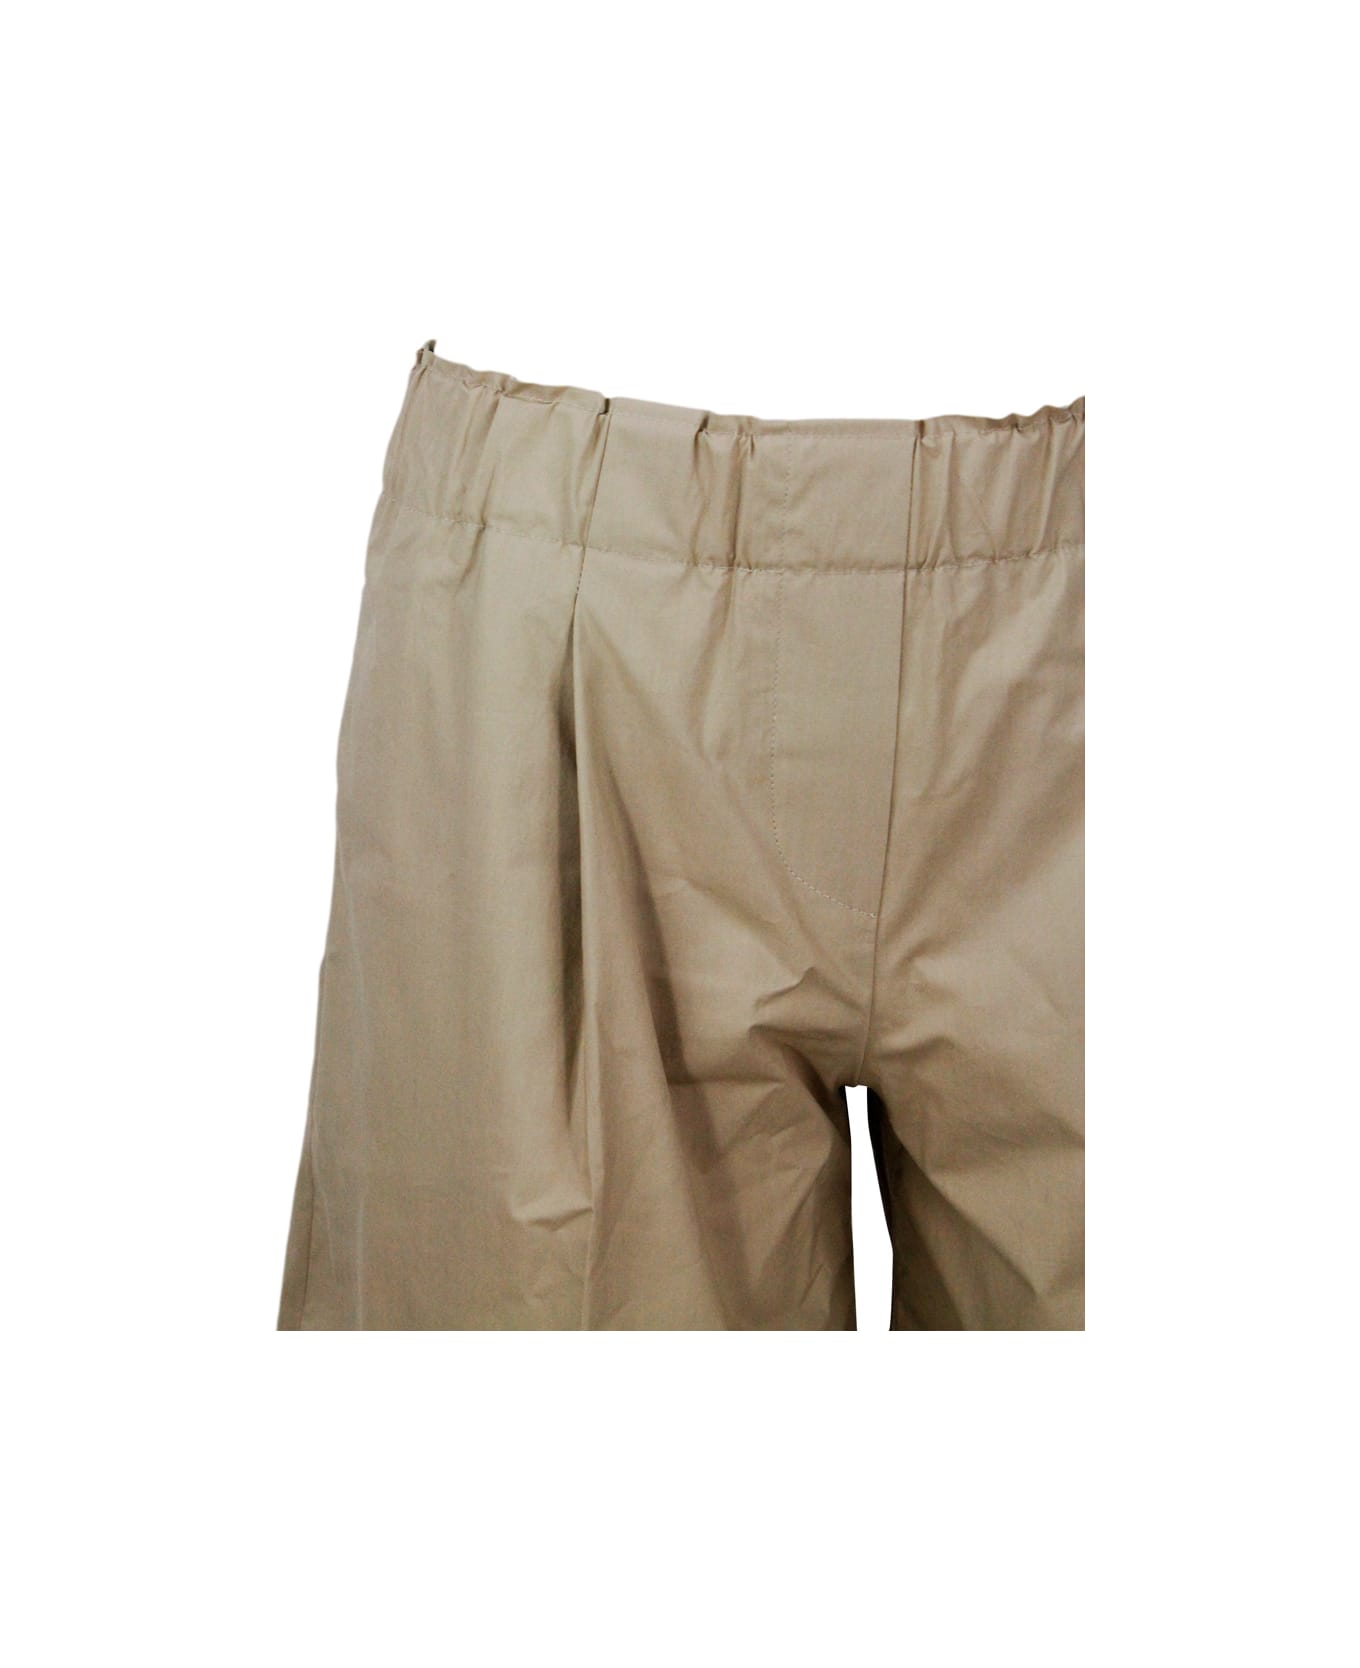 Antonelli Bermuda Shorts With Elasticated Waist And Welt Pockets With Pleats And Turn-up At The Bottom Made Of Stretch Cotton - Beige